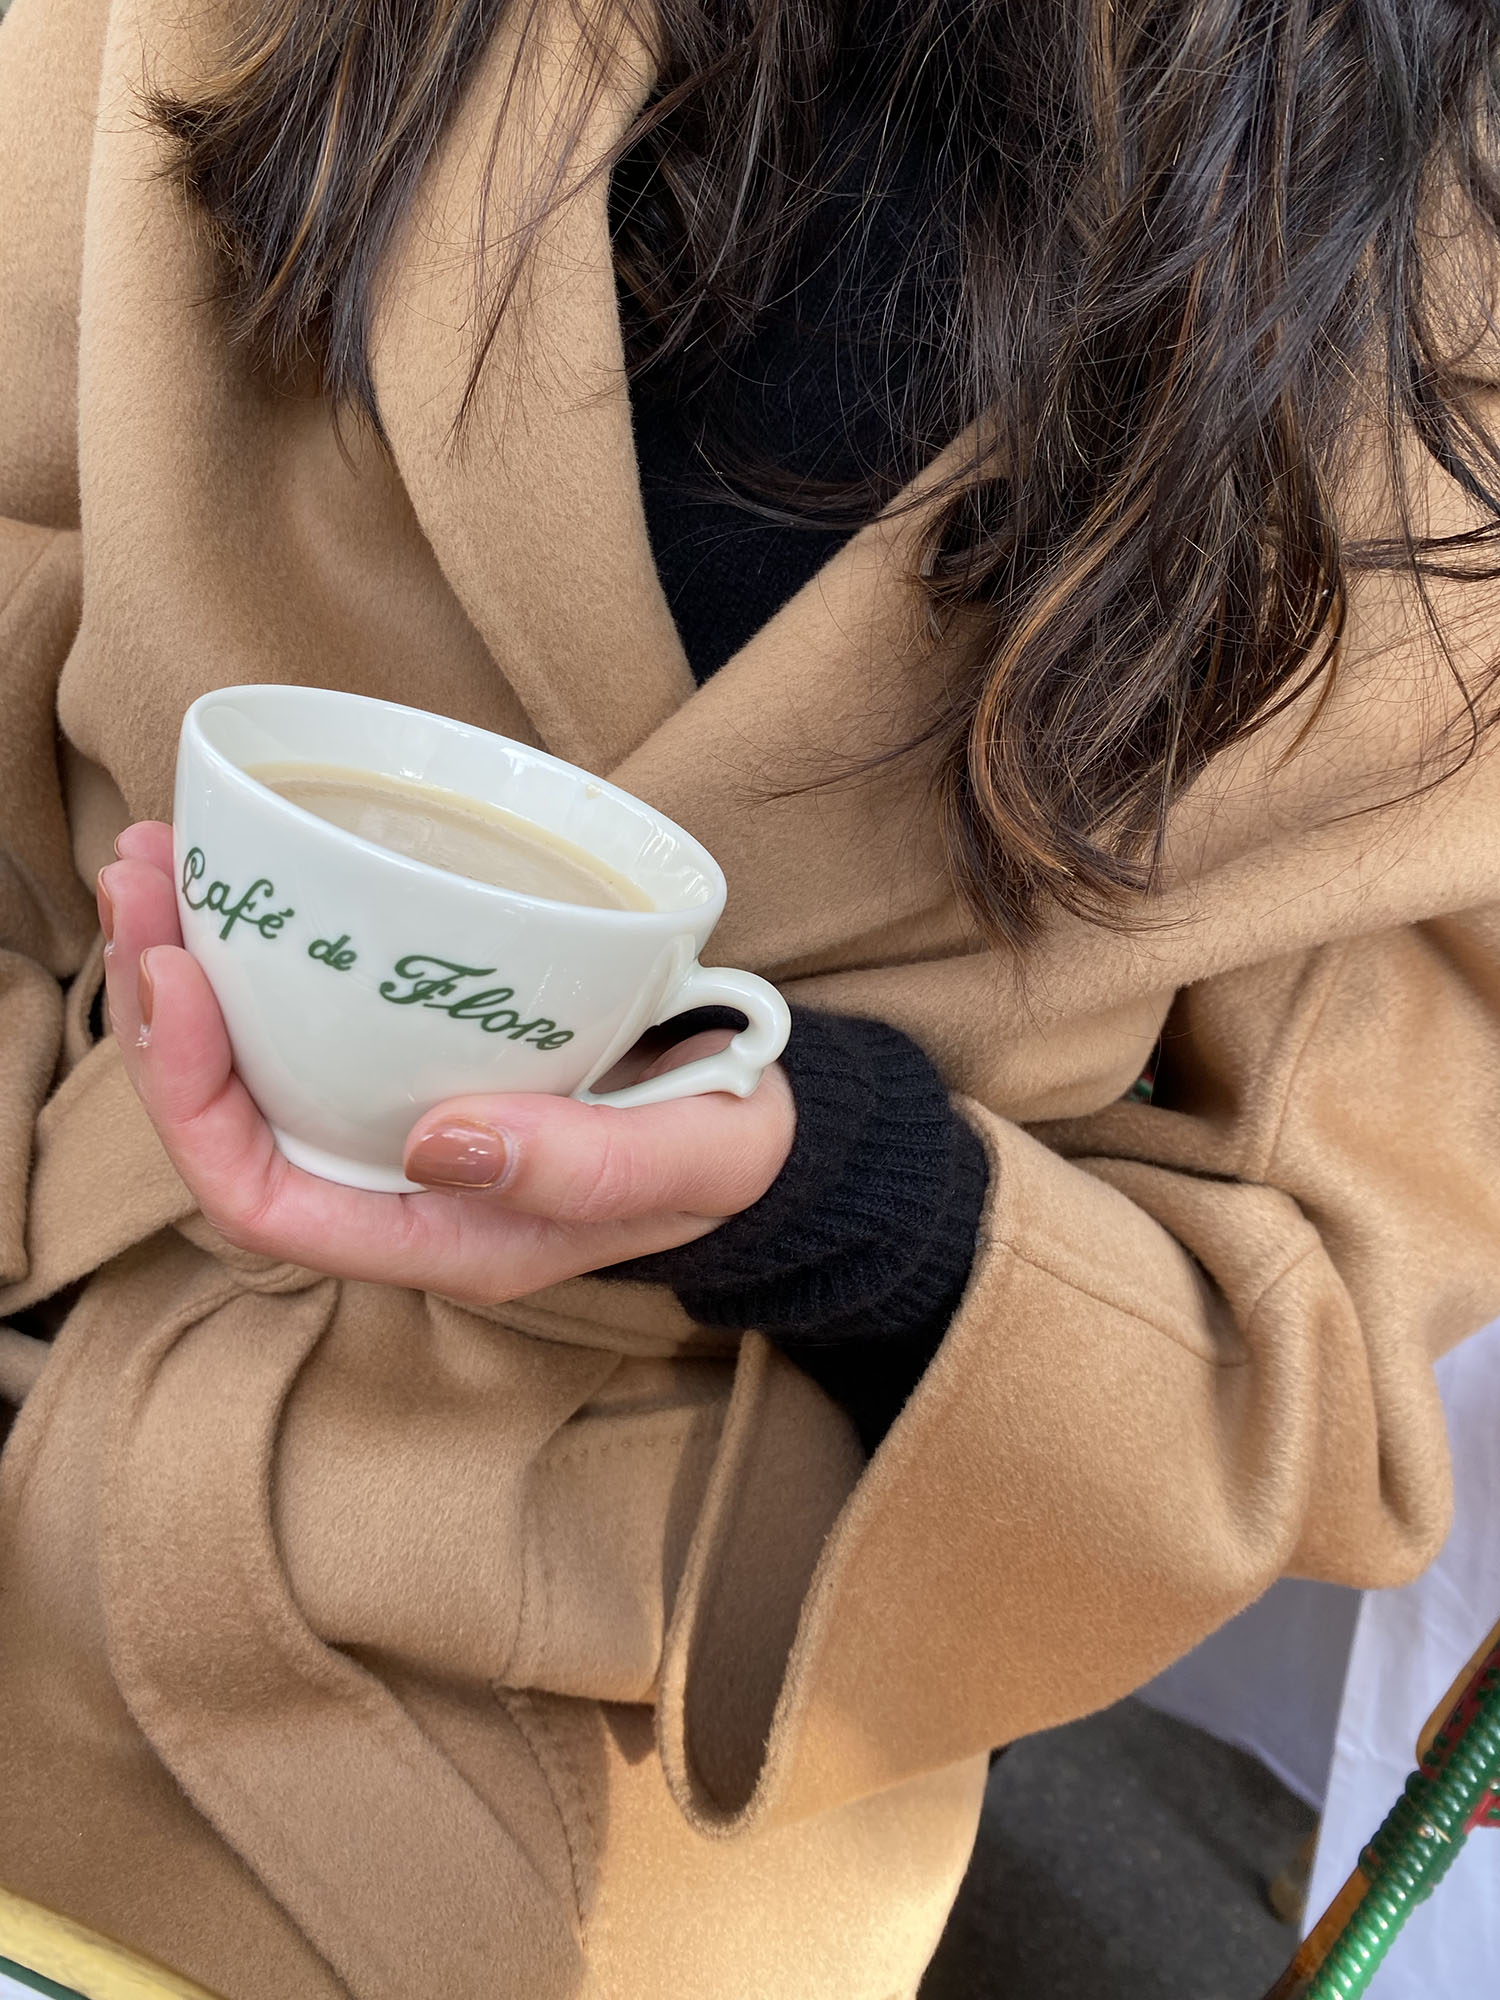 Coco & Vera - The Curated camel coat at the Cafe de Flore in Paris